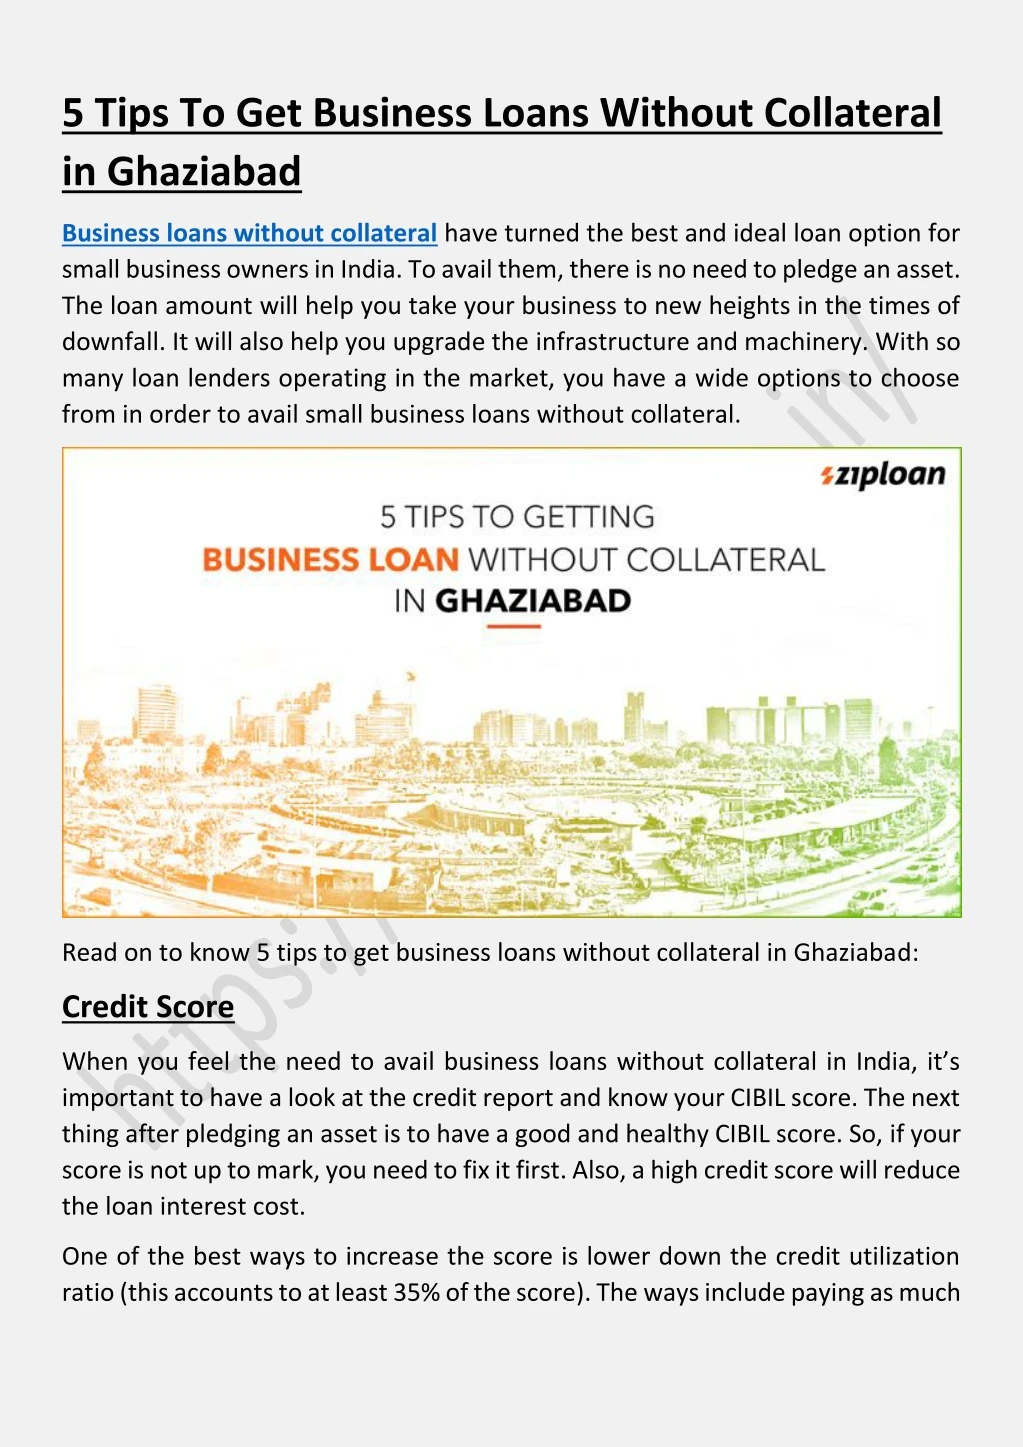 5 tips to get business loans without collateral